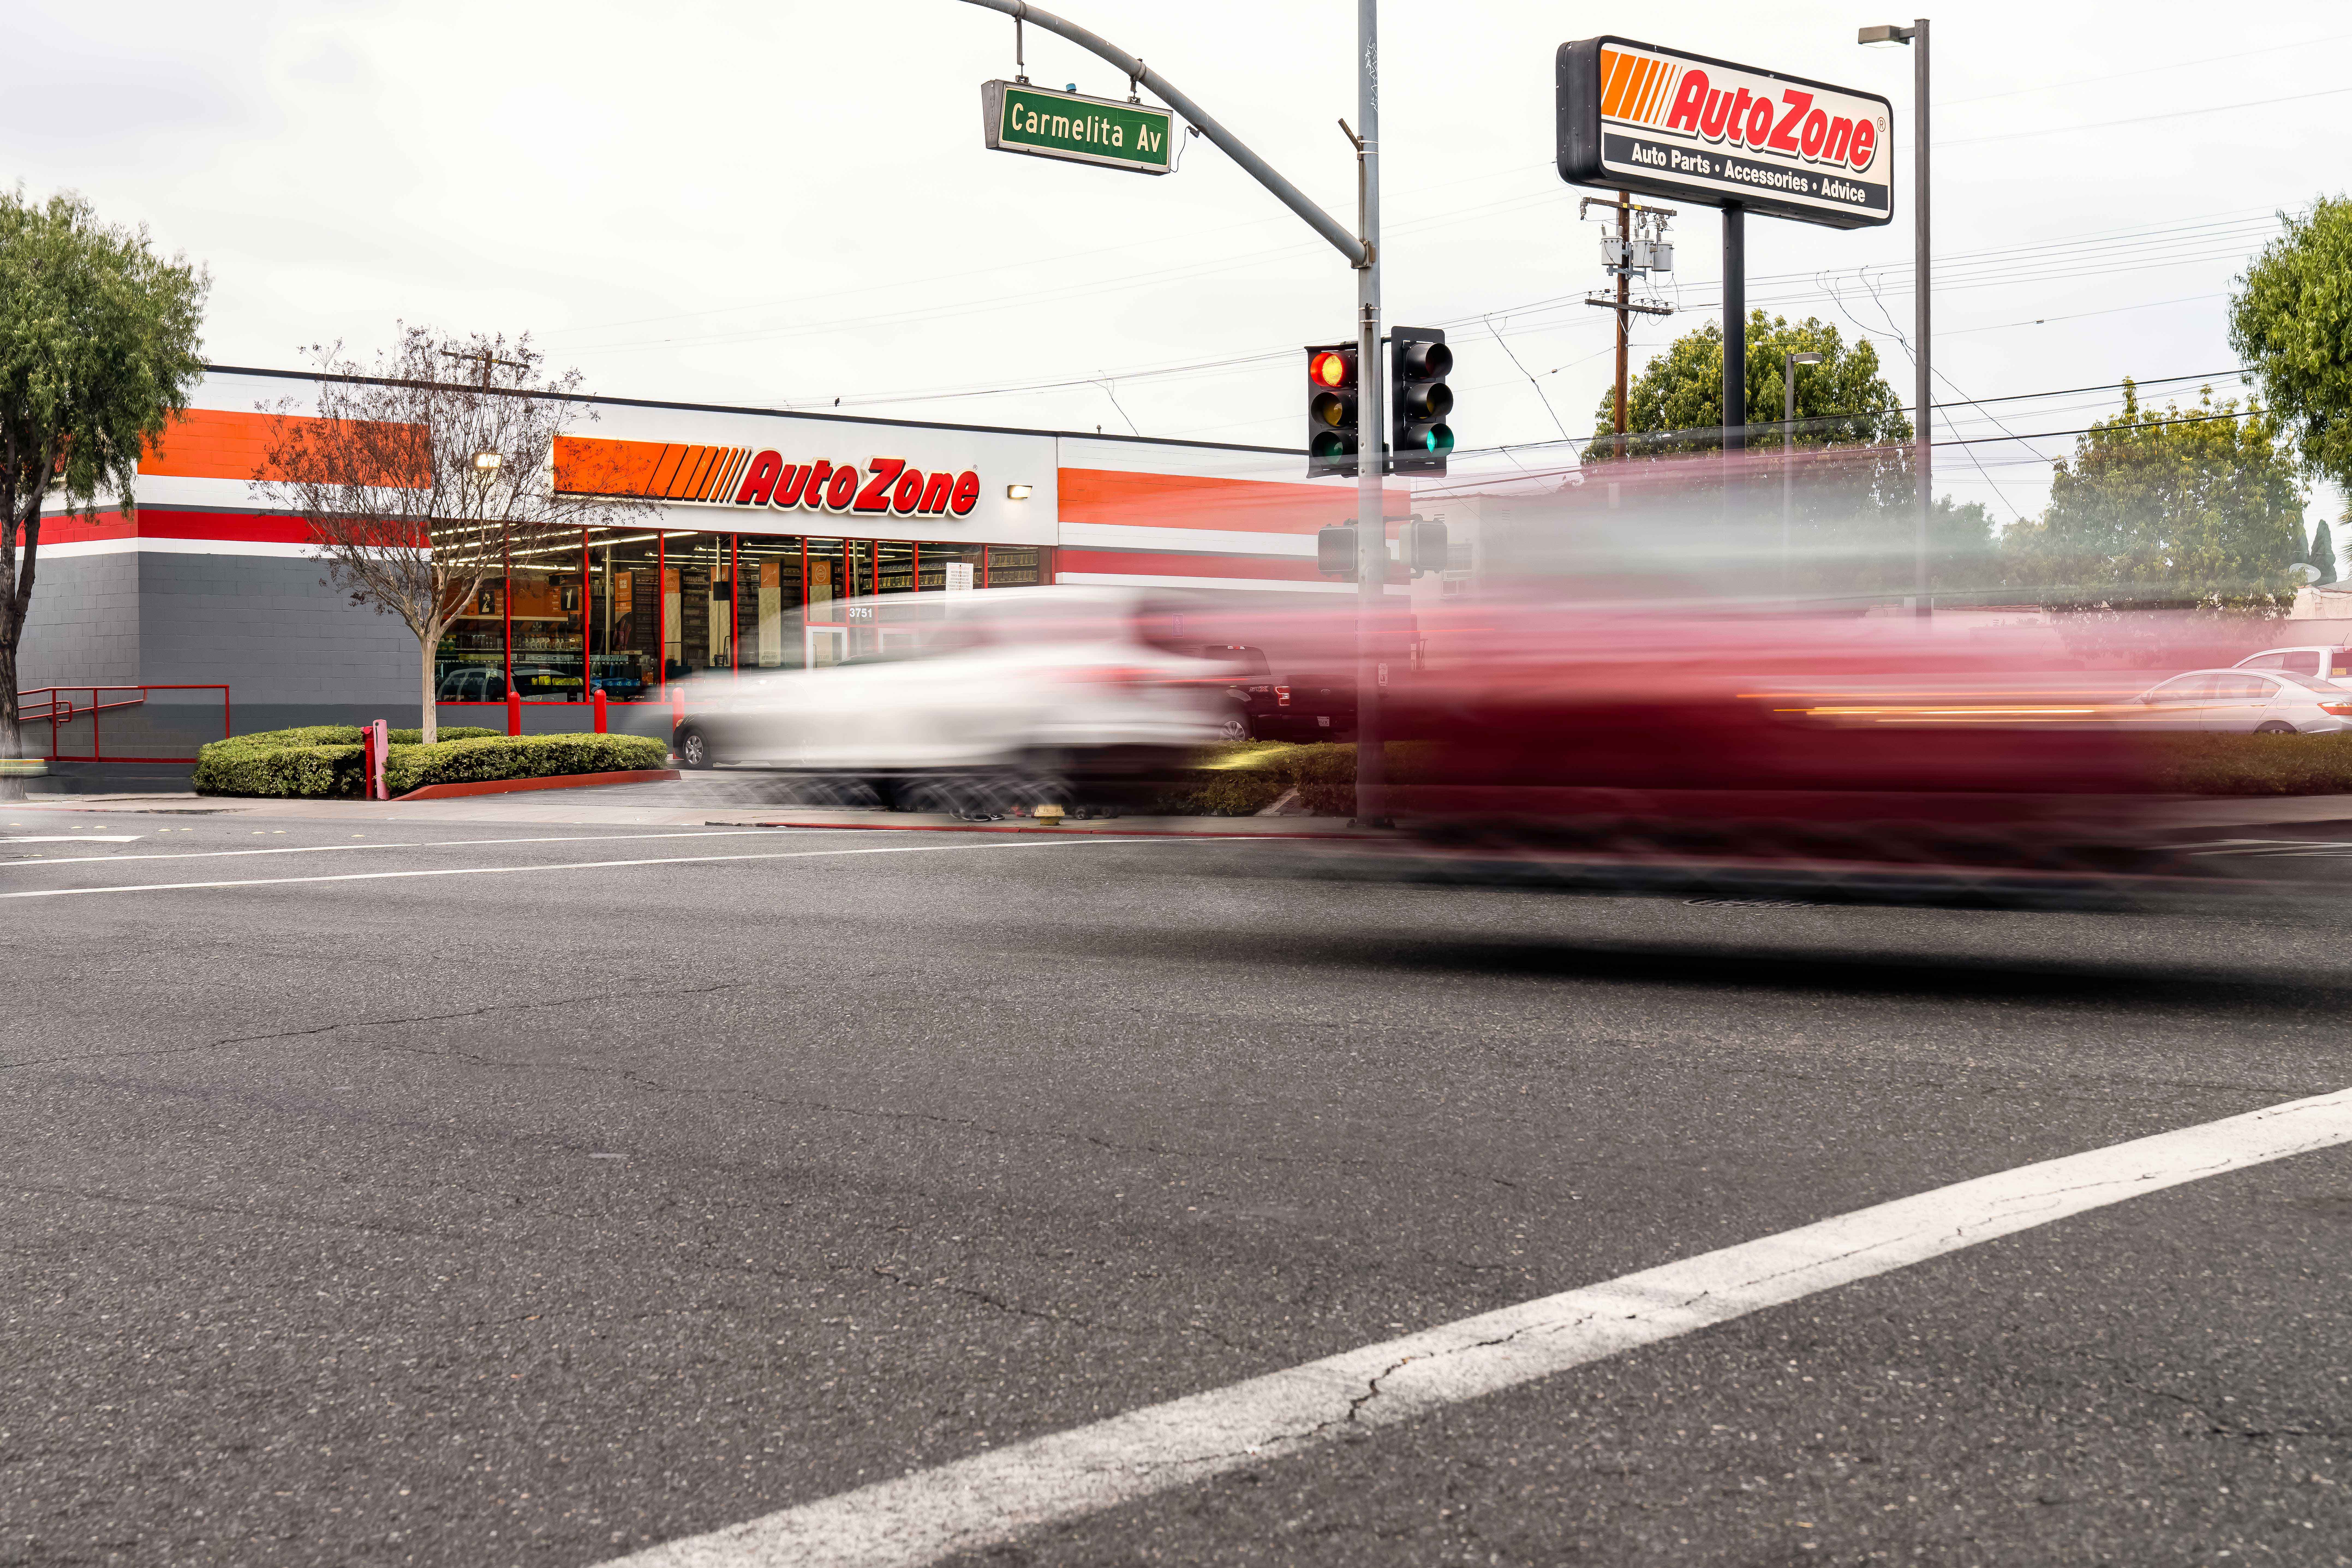 Image of an AutoZone store